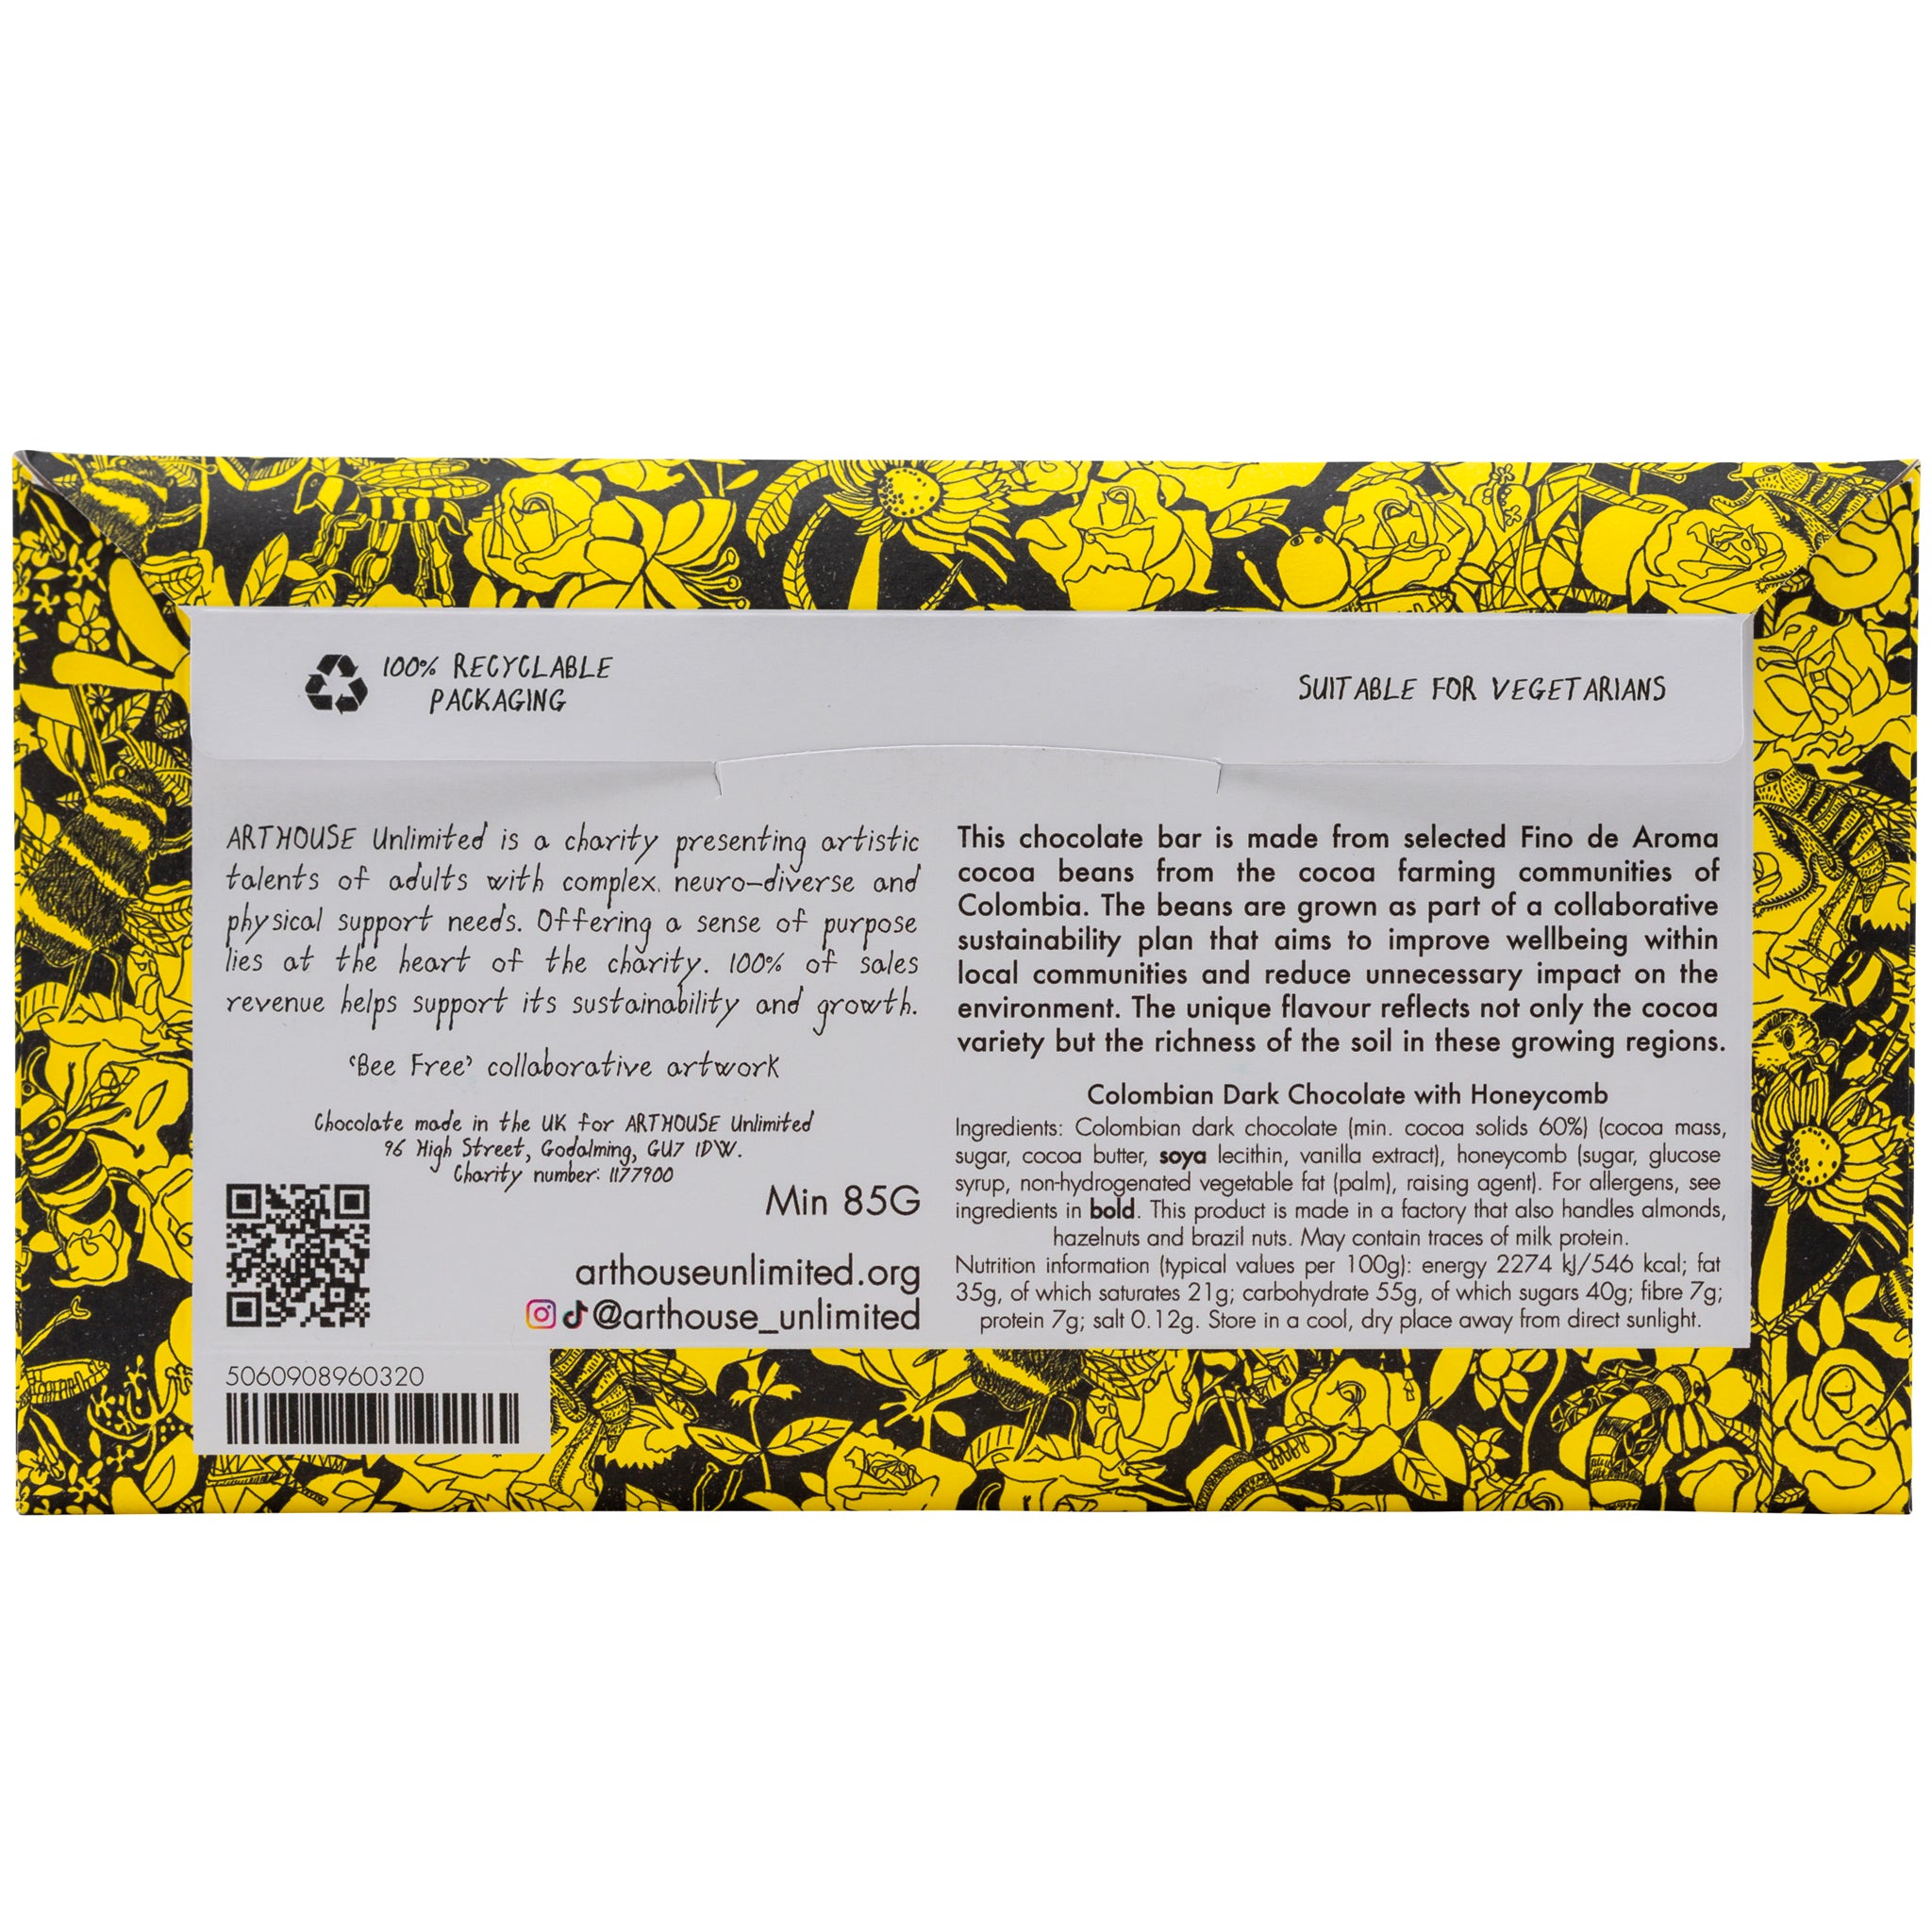 back of packet pink, orange, yellow and gold packet of Bee Free, Dark Chocolate Bar with Honeycomb